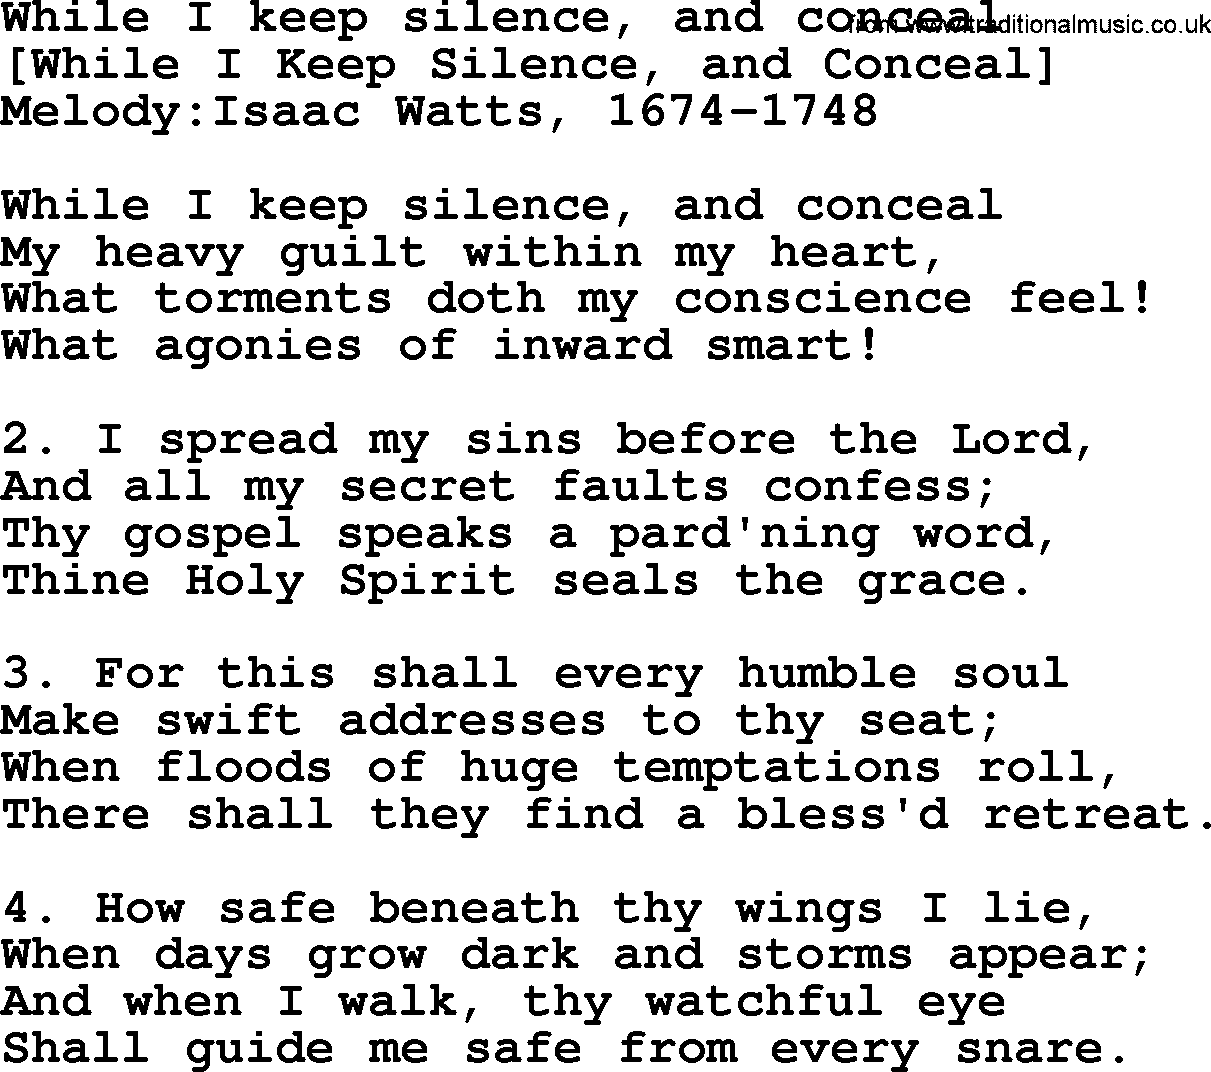 Old English Song: While I Keep Silence, And Conceal lyrics